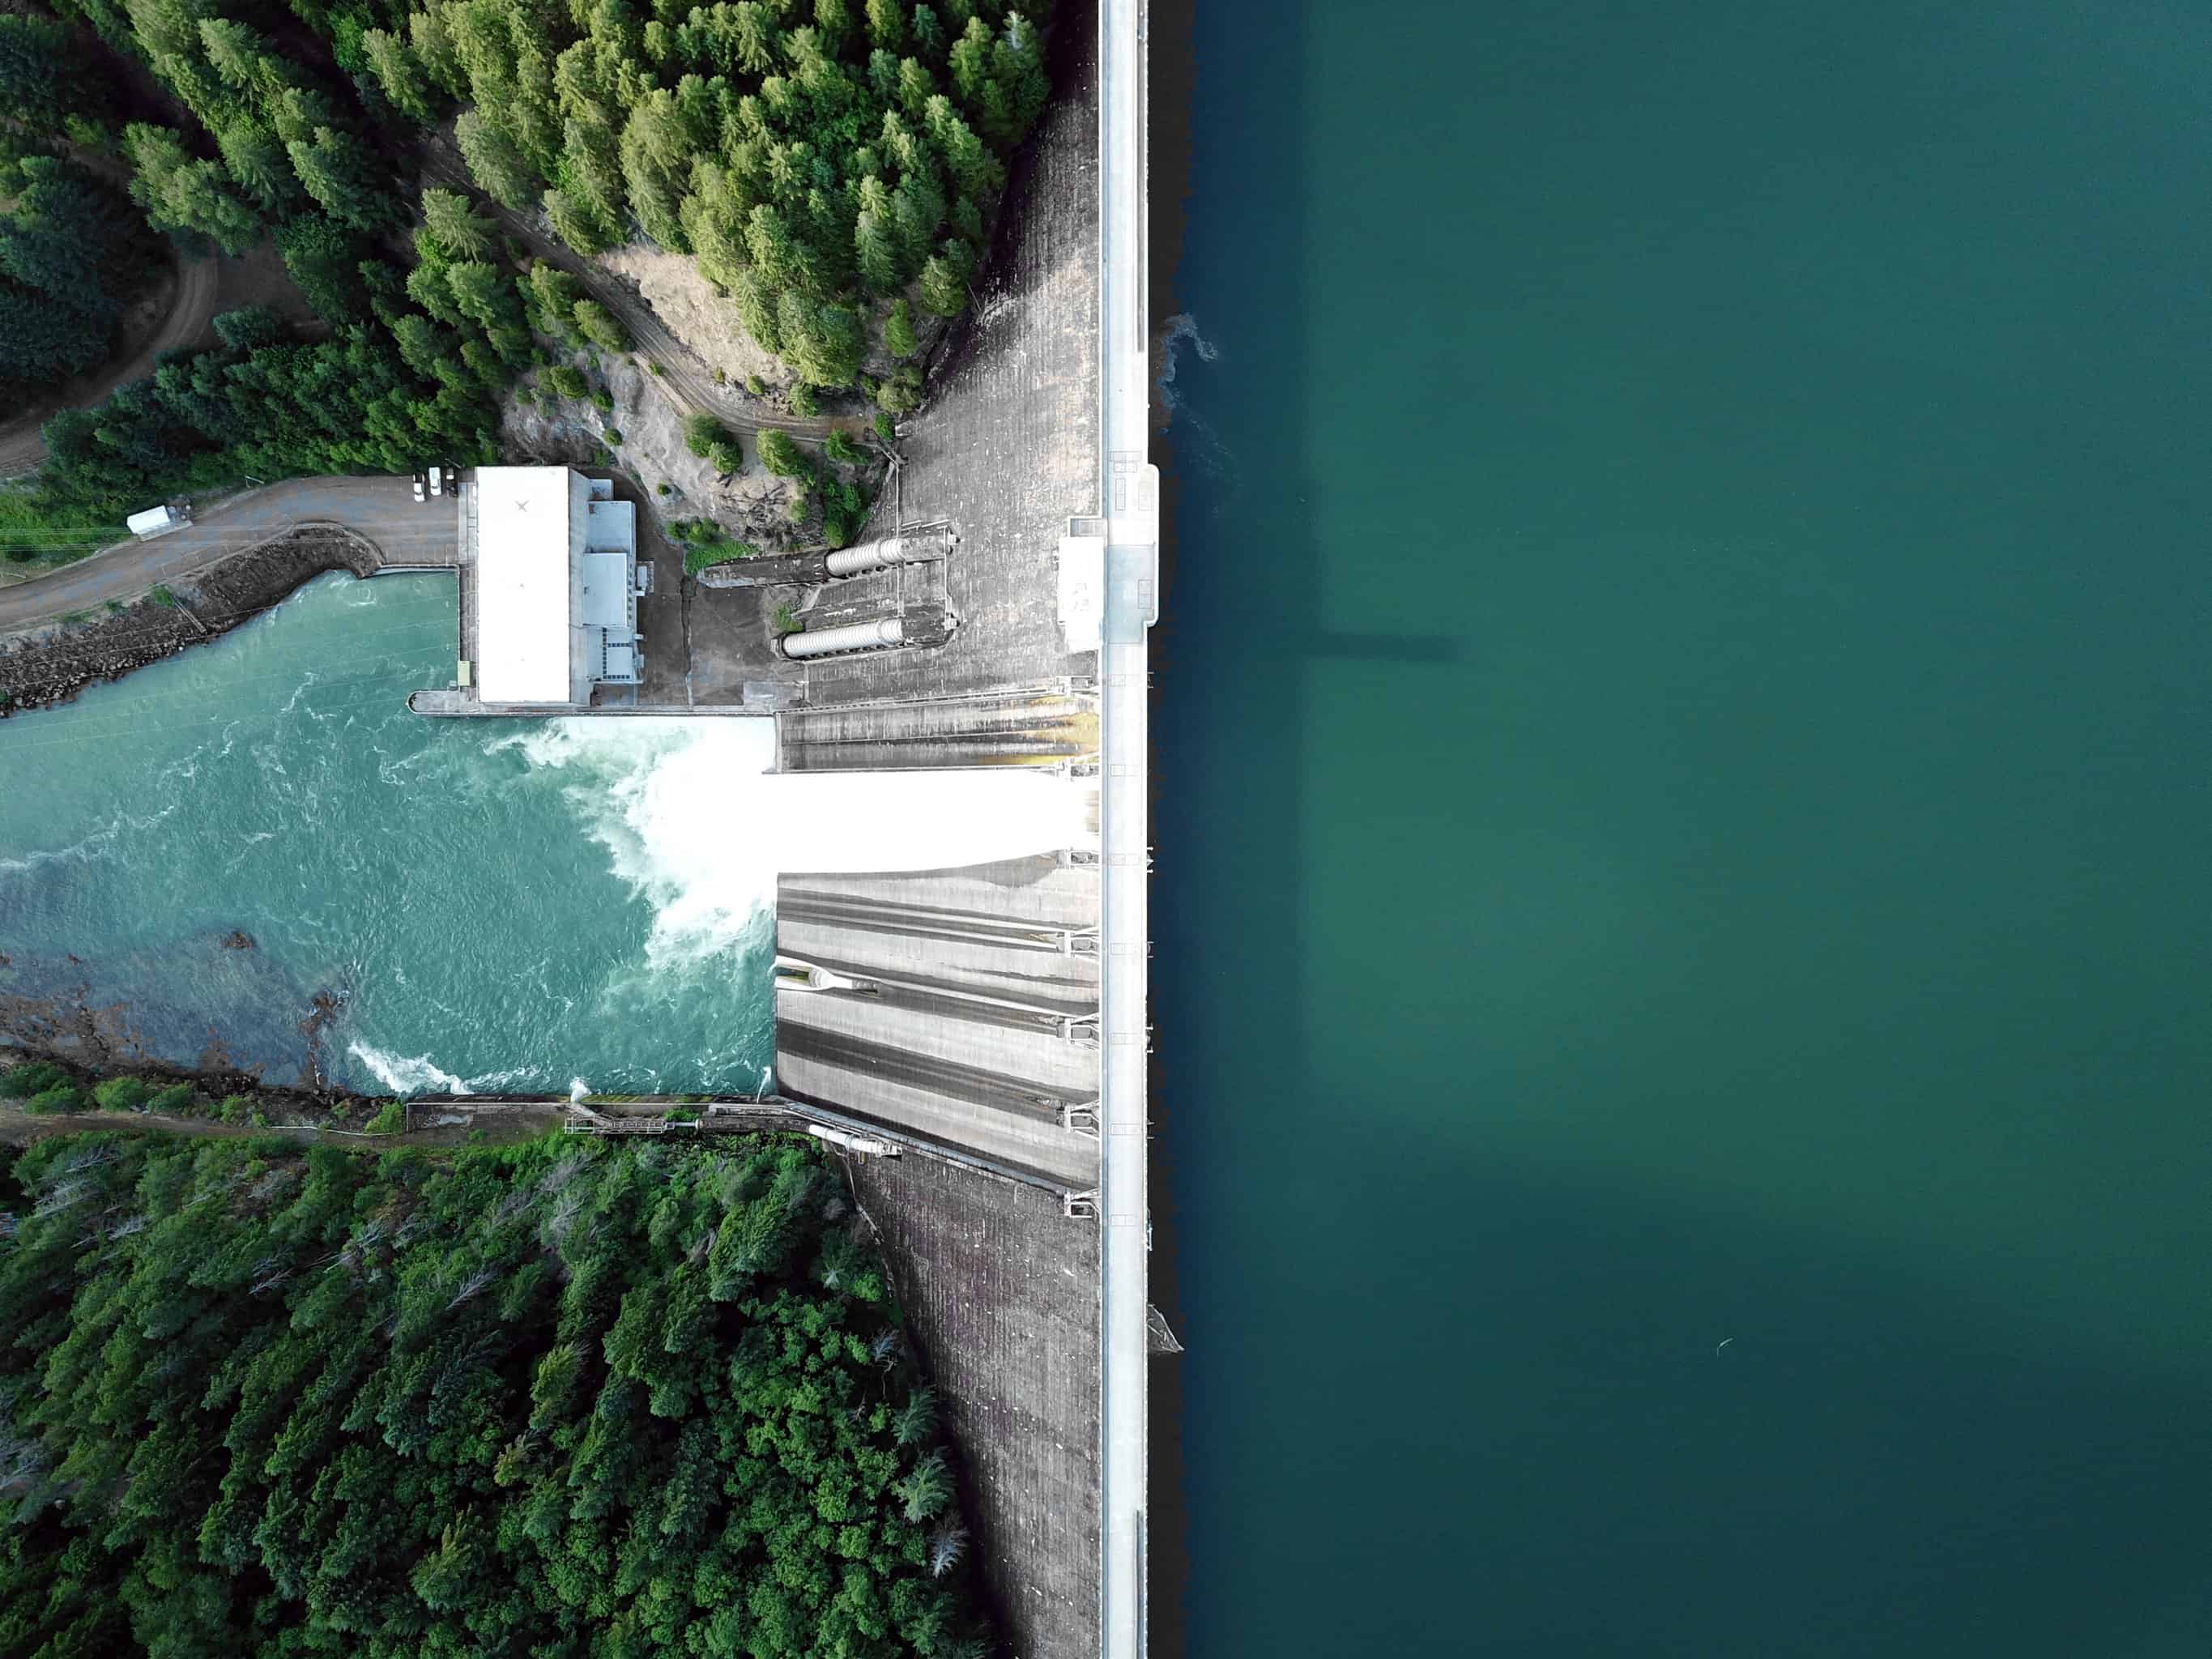 Hydropower dam from above